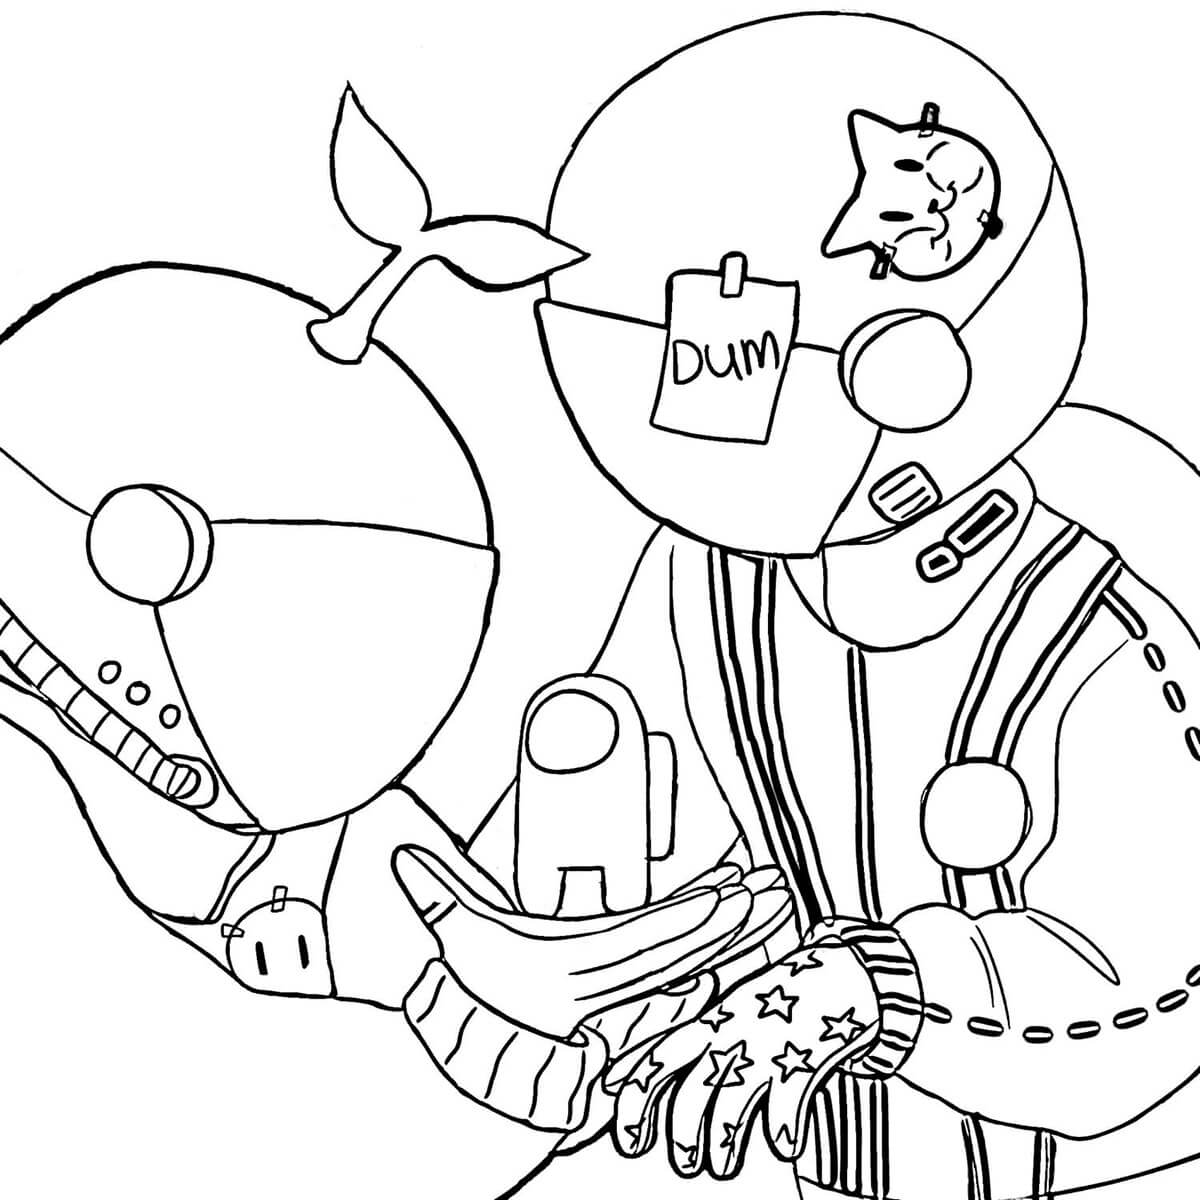 Among Us Imposter Coloring Page Free Printable Coloring Pages for Kids